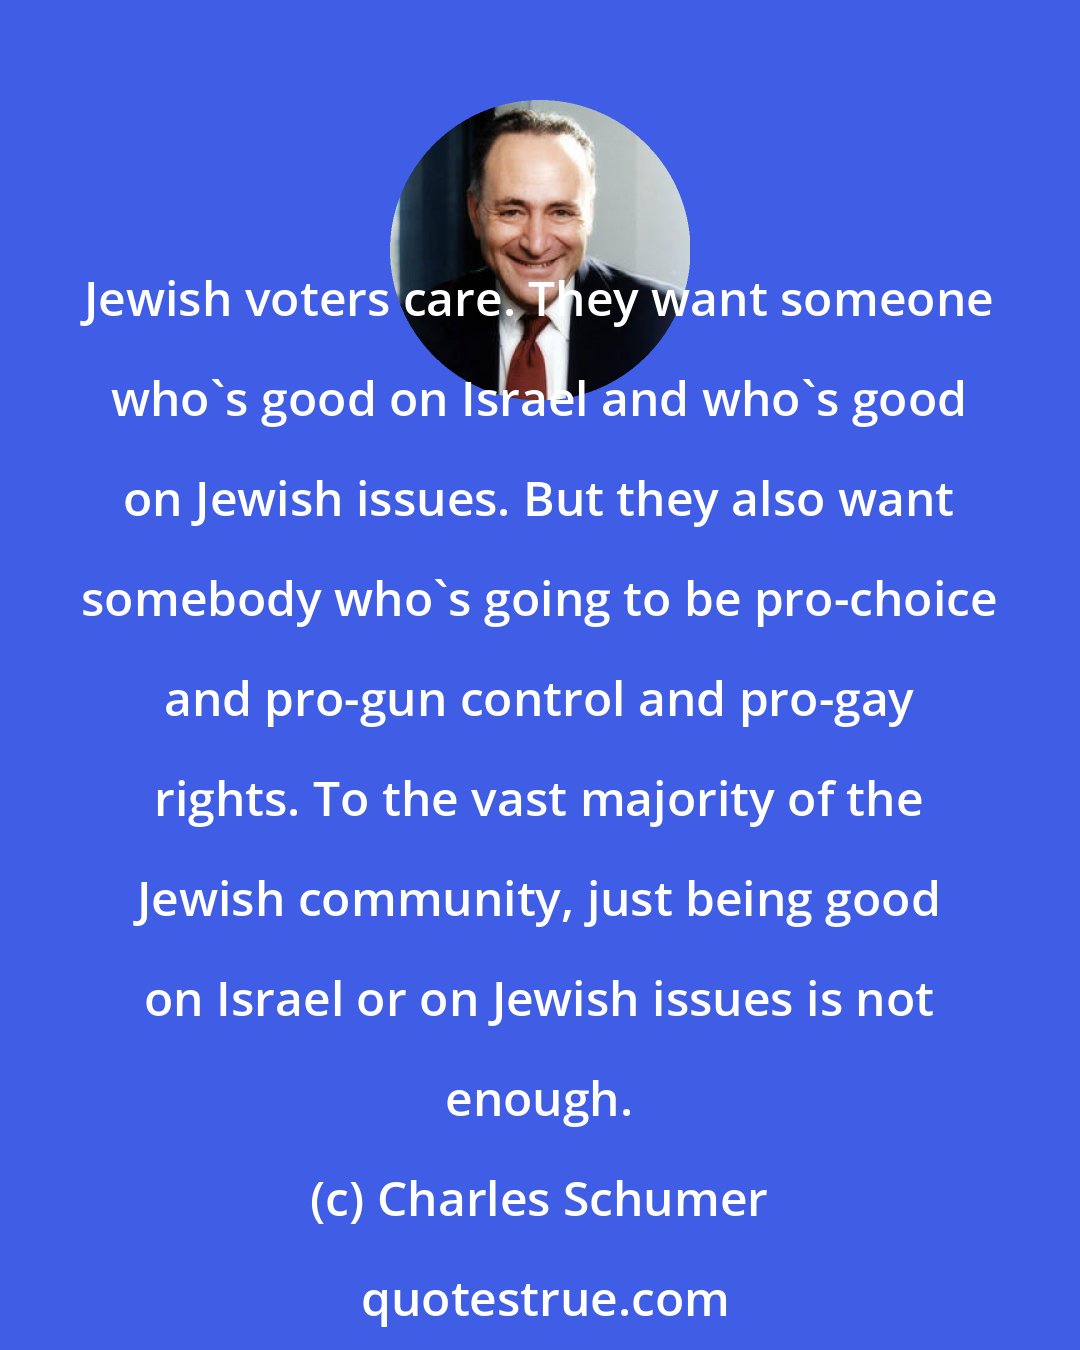 Charles Schumer: Jewish voters care. They want someone who's good on Israel and who's good on Jewish issues. But they also want somebody who's going to be pro-choice and pro-gun control and pro-gay rights. To the vast majority of the Jewish community, just being good on Israel or on Jewish issues is not enough.